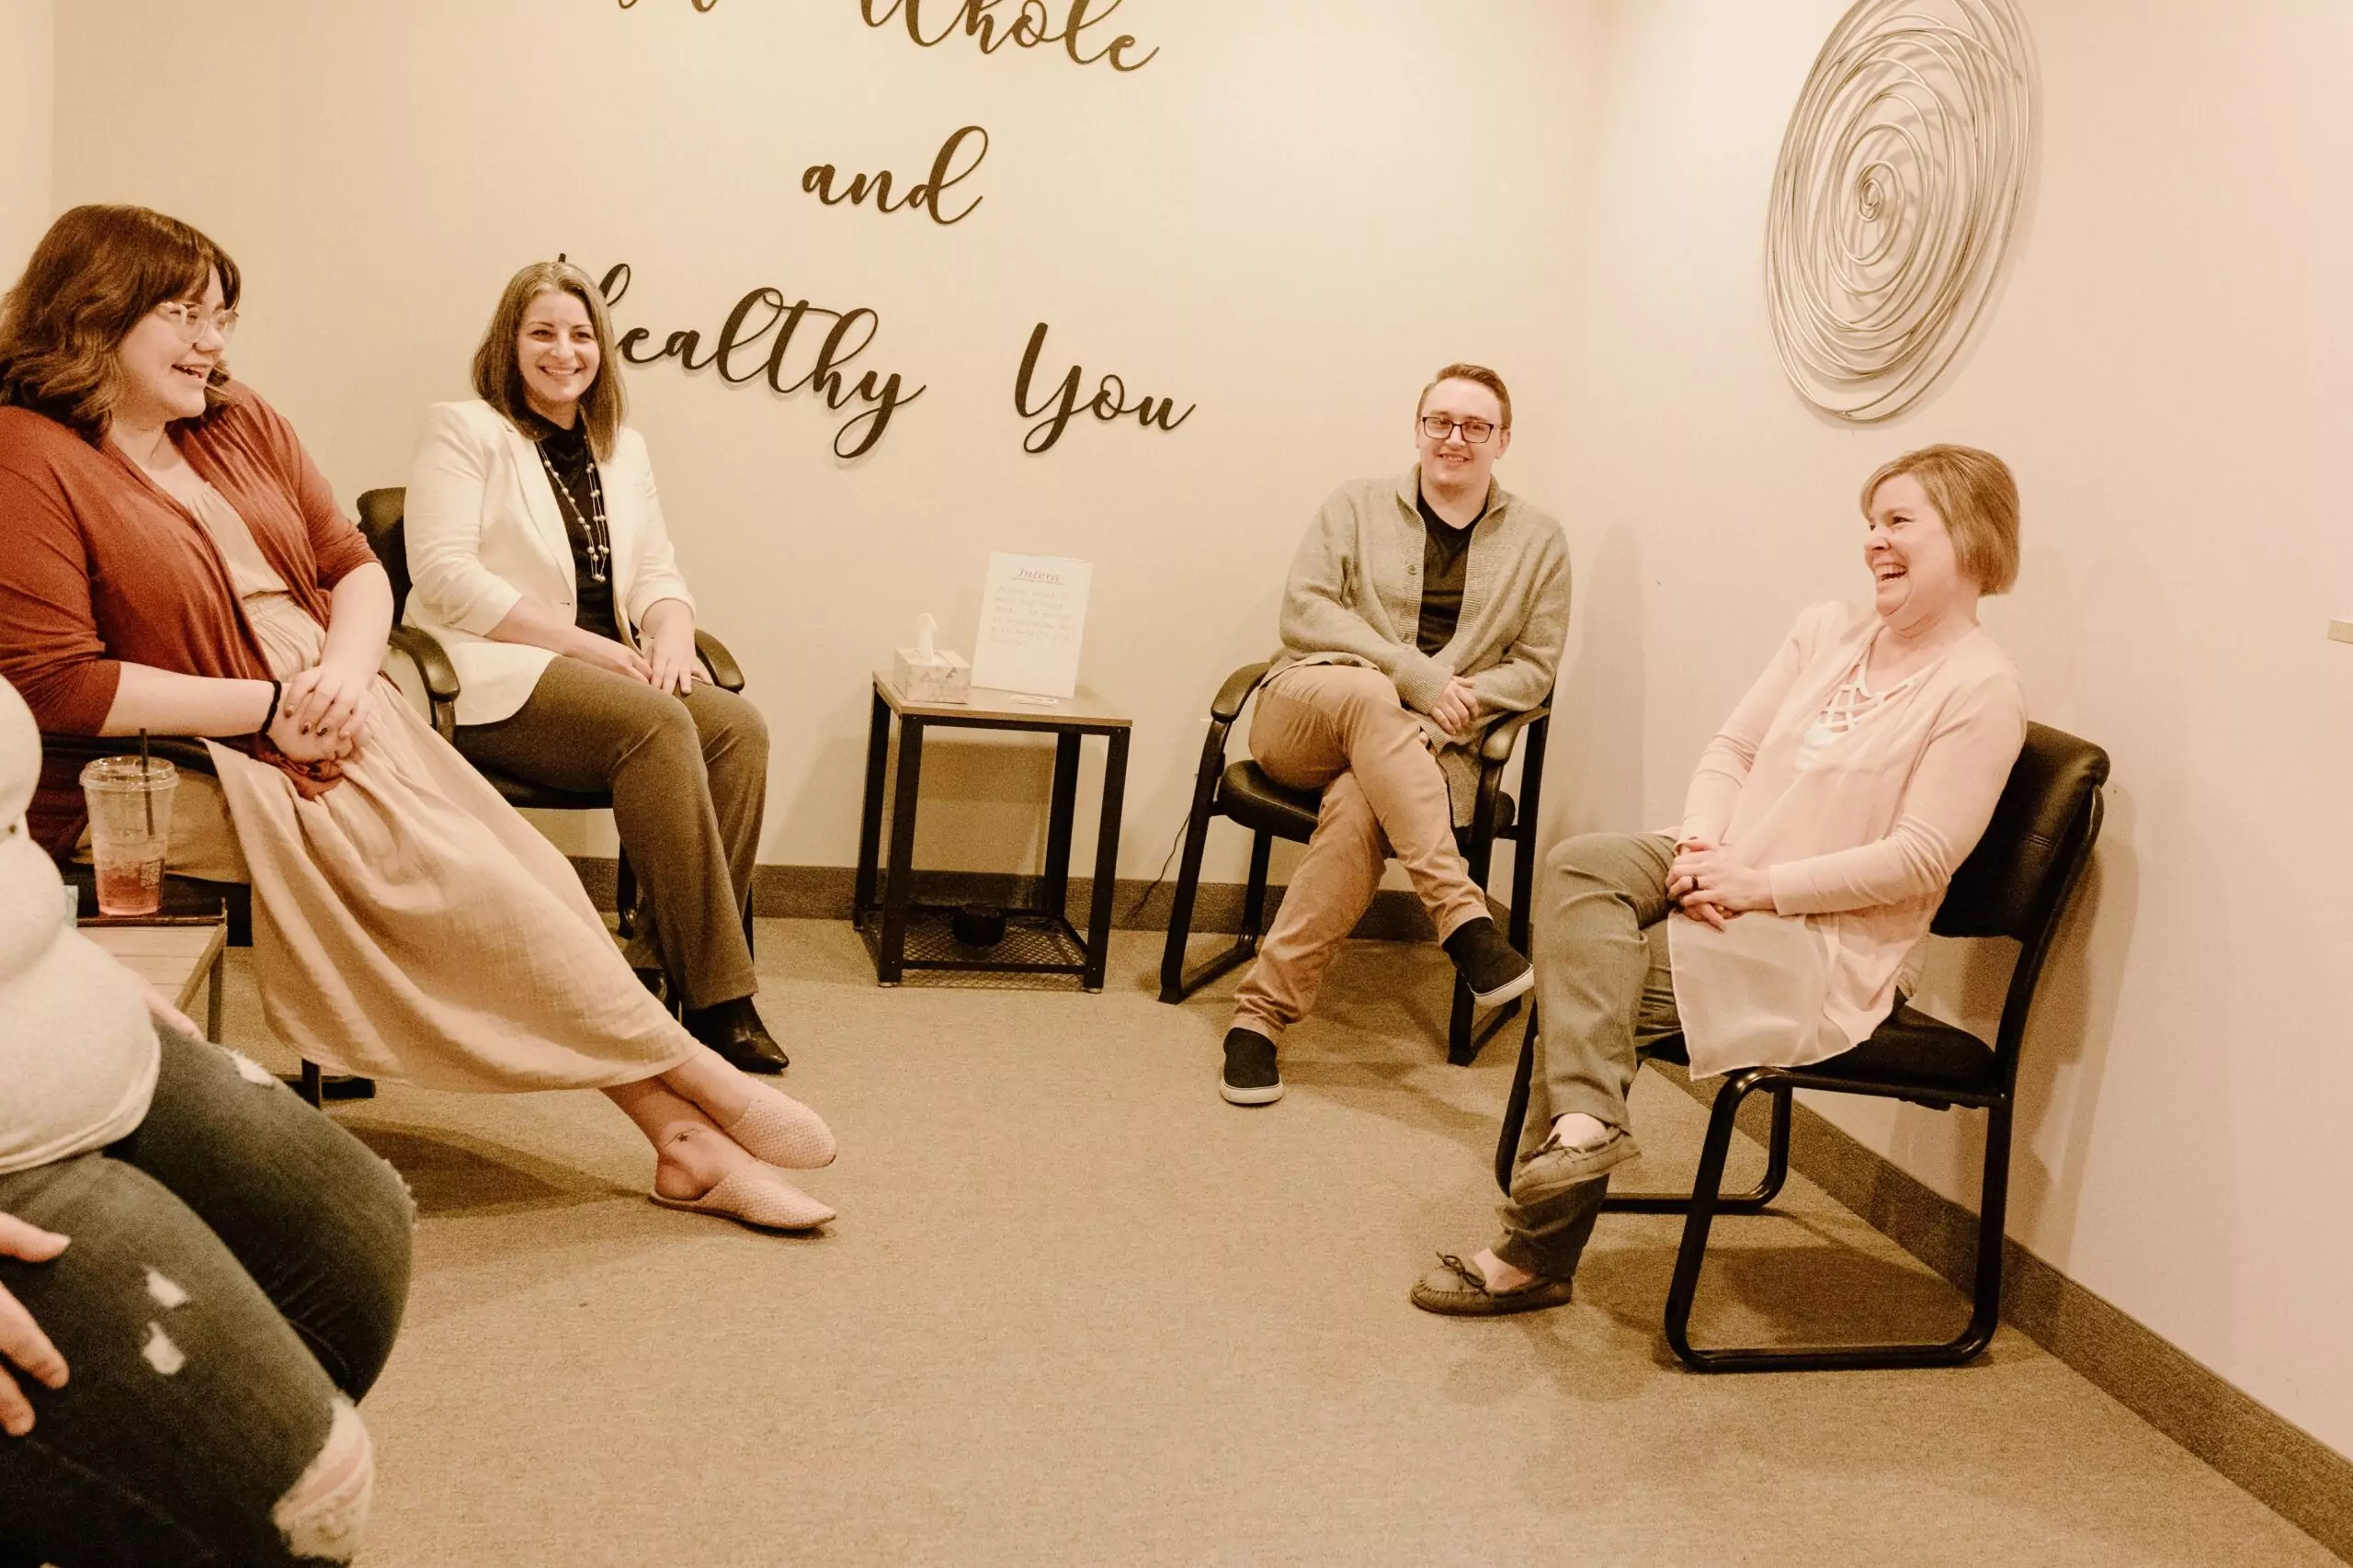 The staff of Intera sitting in the waiting room. From left to right: Amanda, Mary, Jared, Angela.